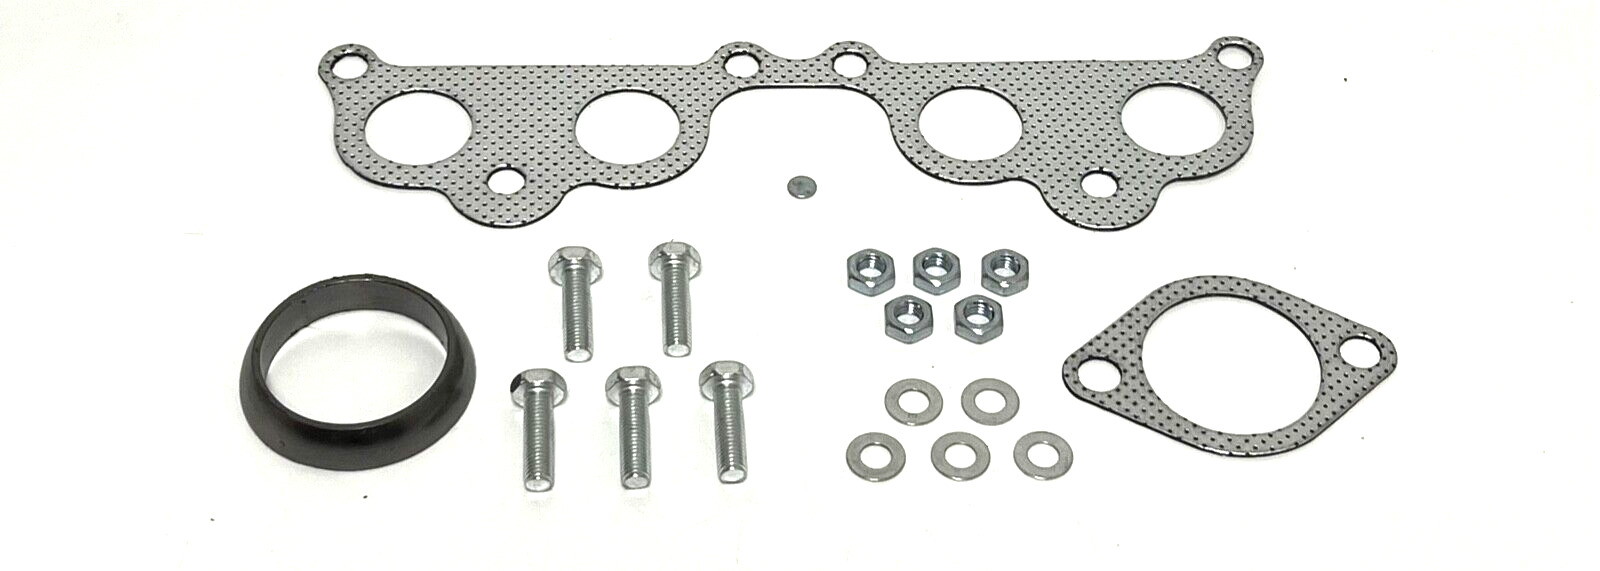 Header Gaskets and Bolts Set For 1995-2001 Toyota Tacoma 2.4L 2.7L L4 2.4 2.7